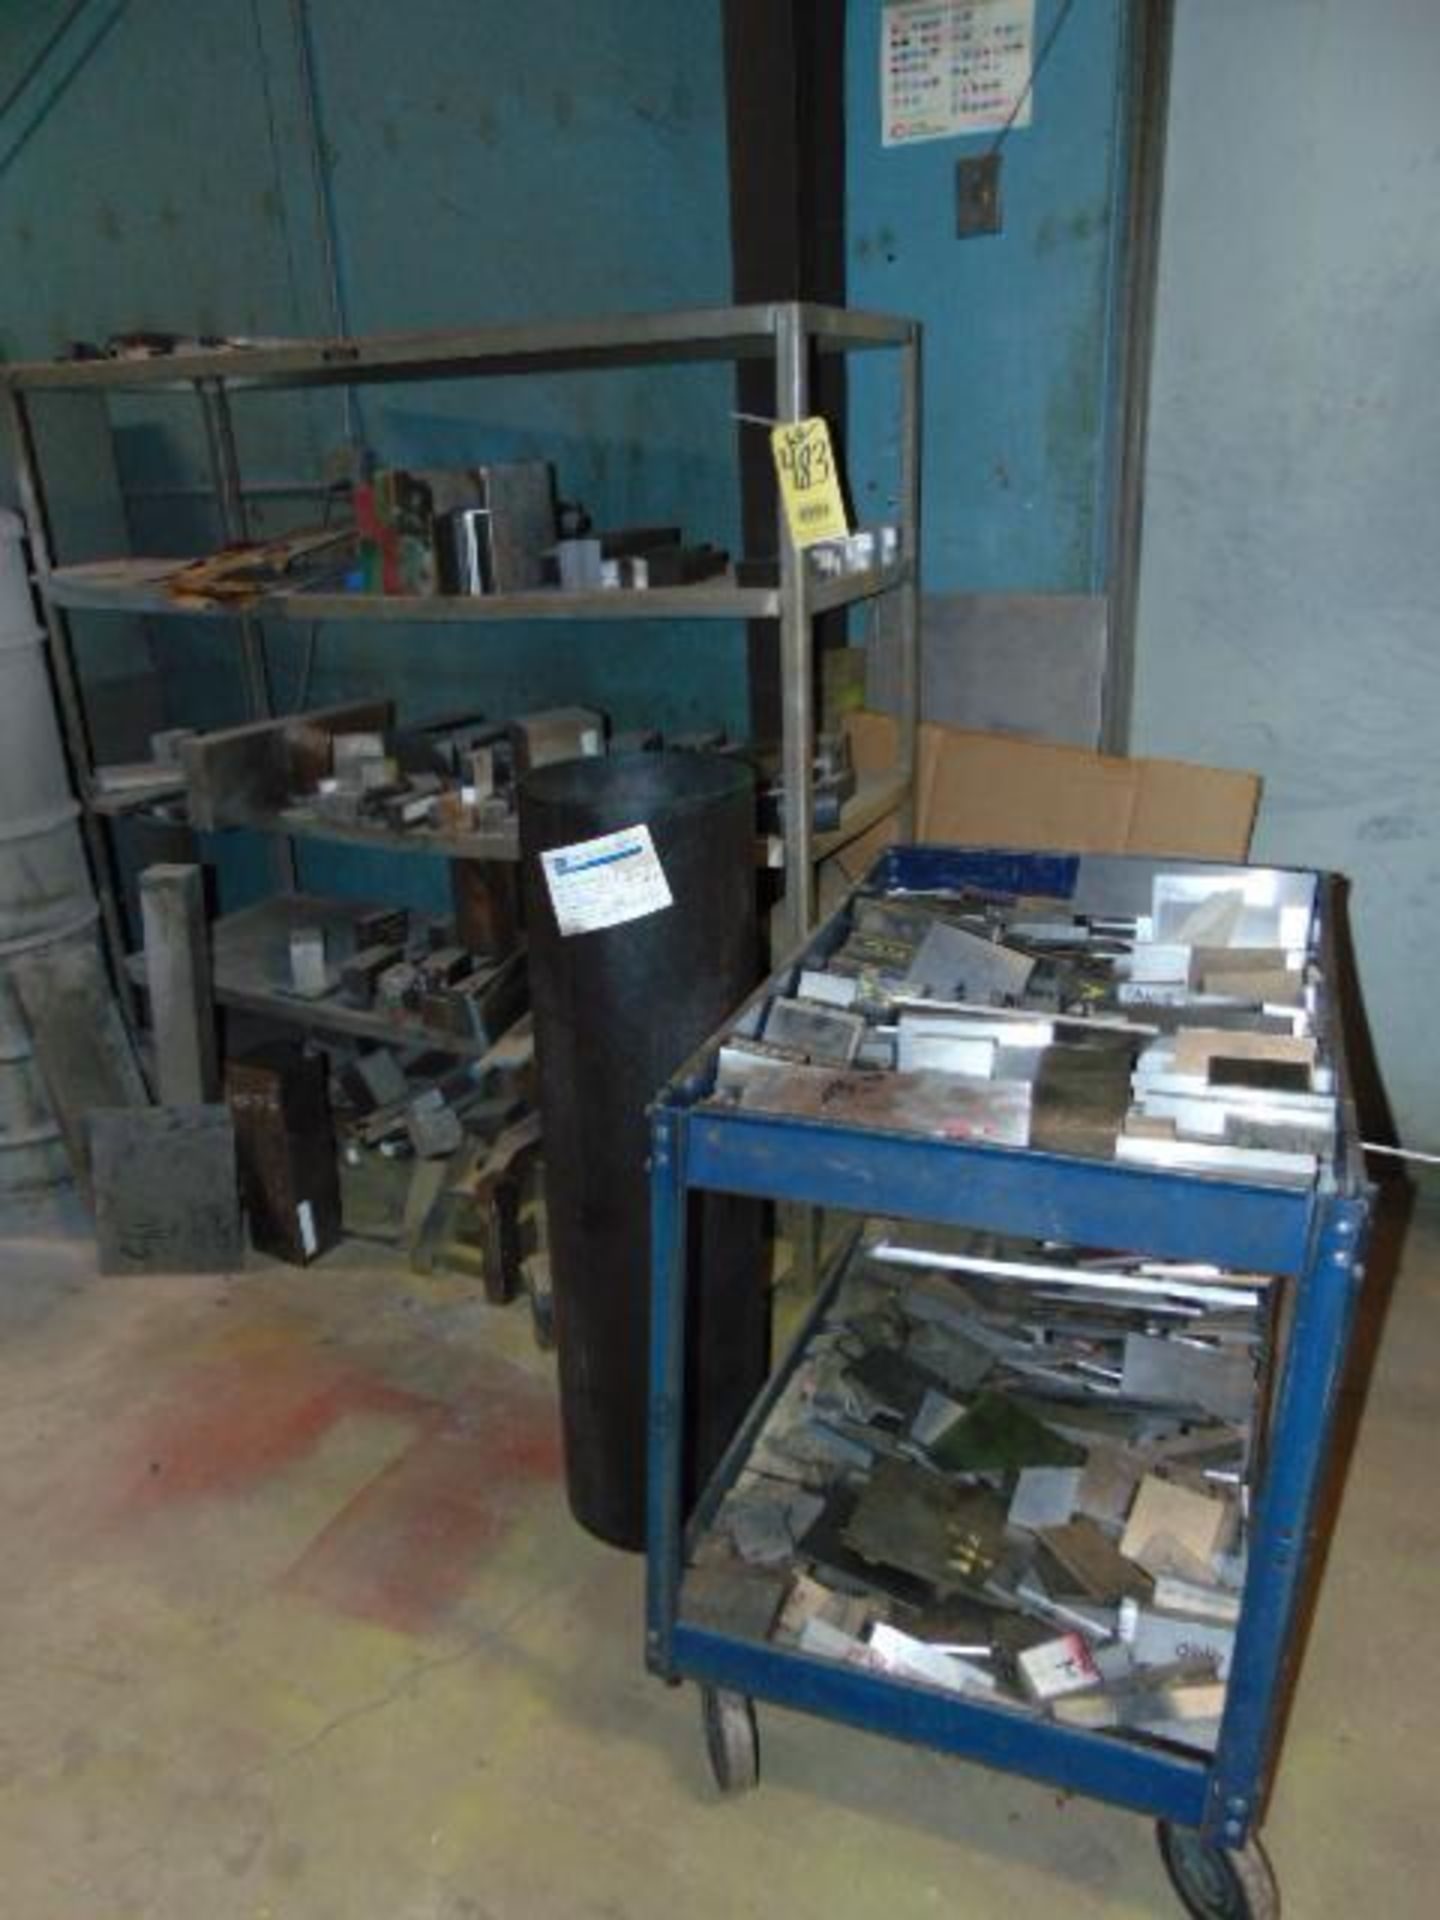 LOT CONSISTING OF TOOL STEEL: 4140, HRS, F7, D2, M2, M4, A2, VAN; large assortment, in sorted rack, - Image 2 of 13